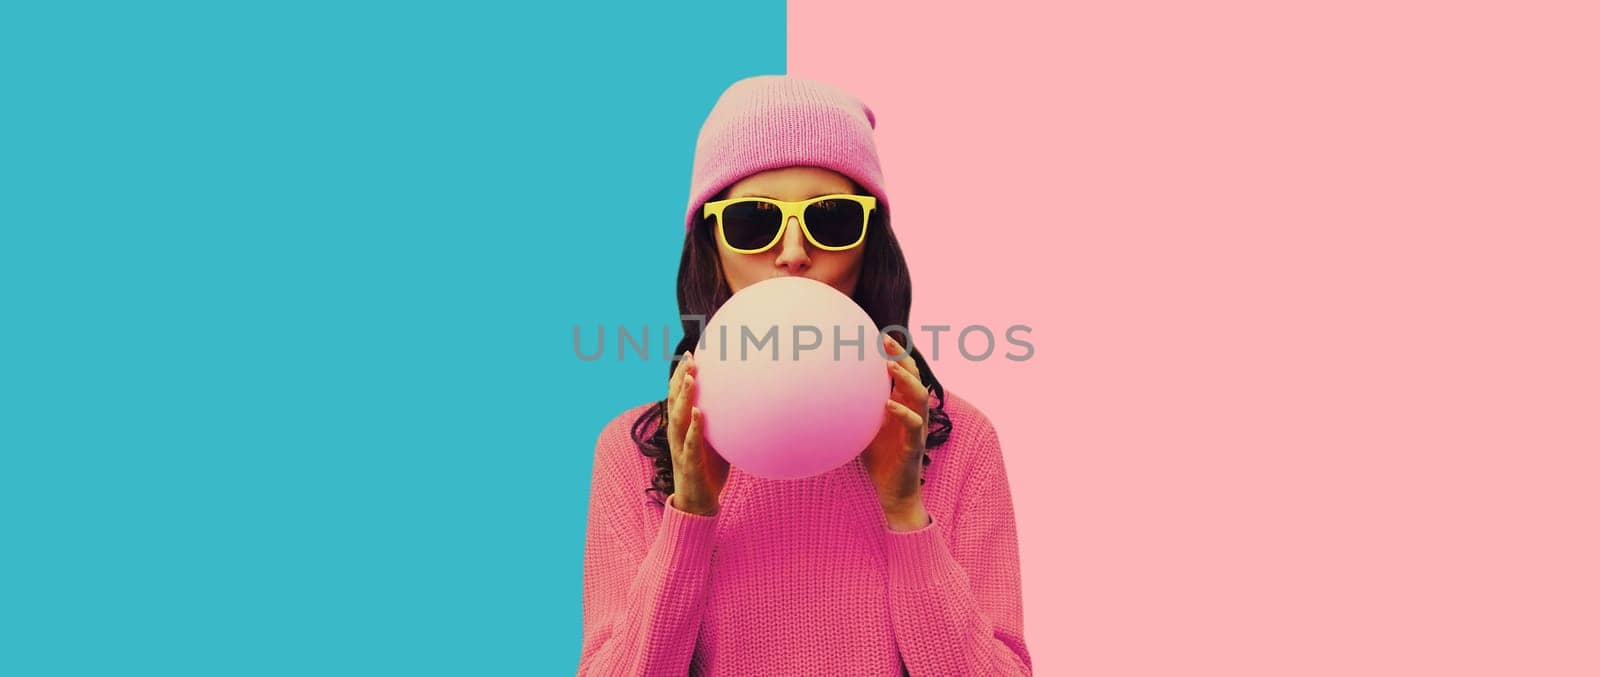 Fashion portrait of stylish cool young woman inflating chewing gum or balloon in pink hat, sunglasses on colorful studio background